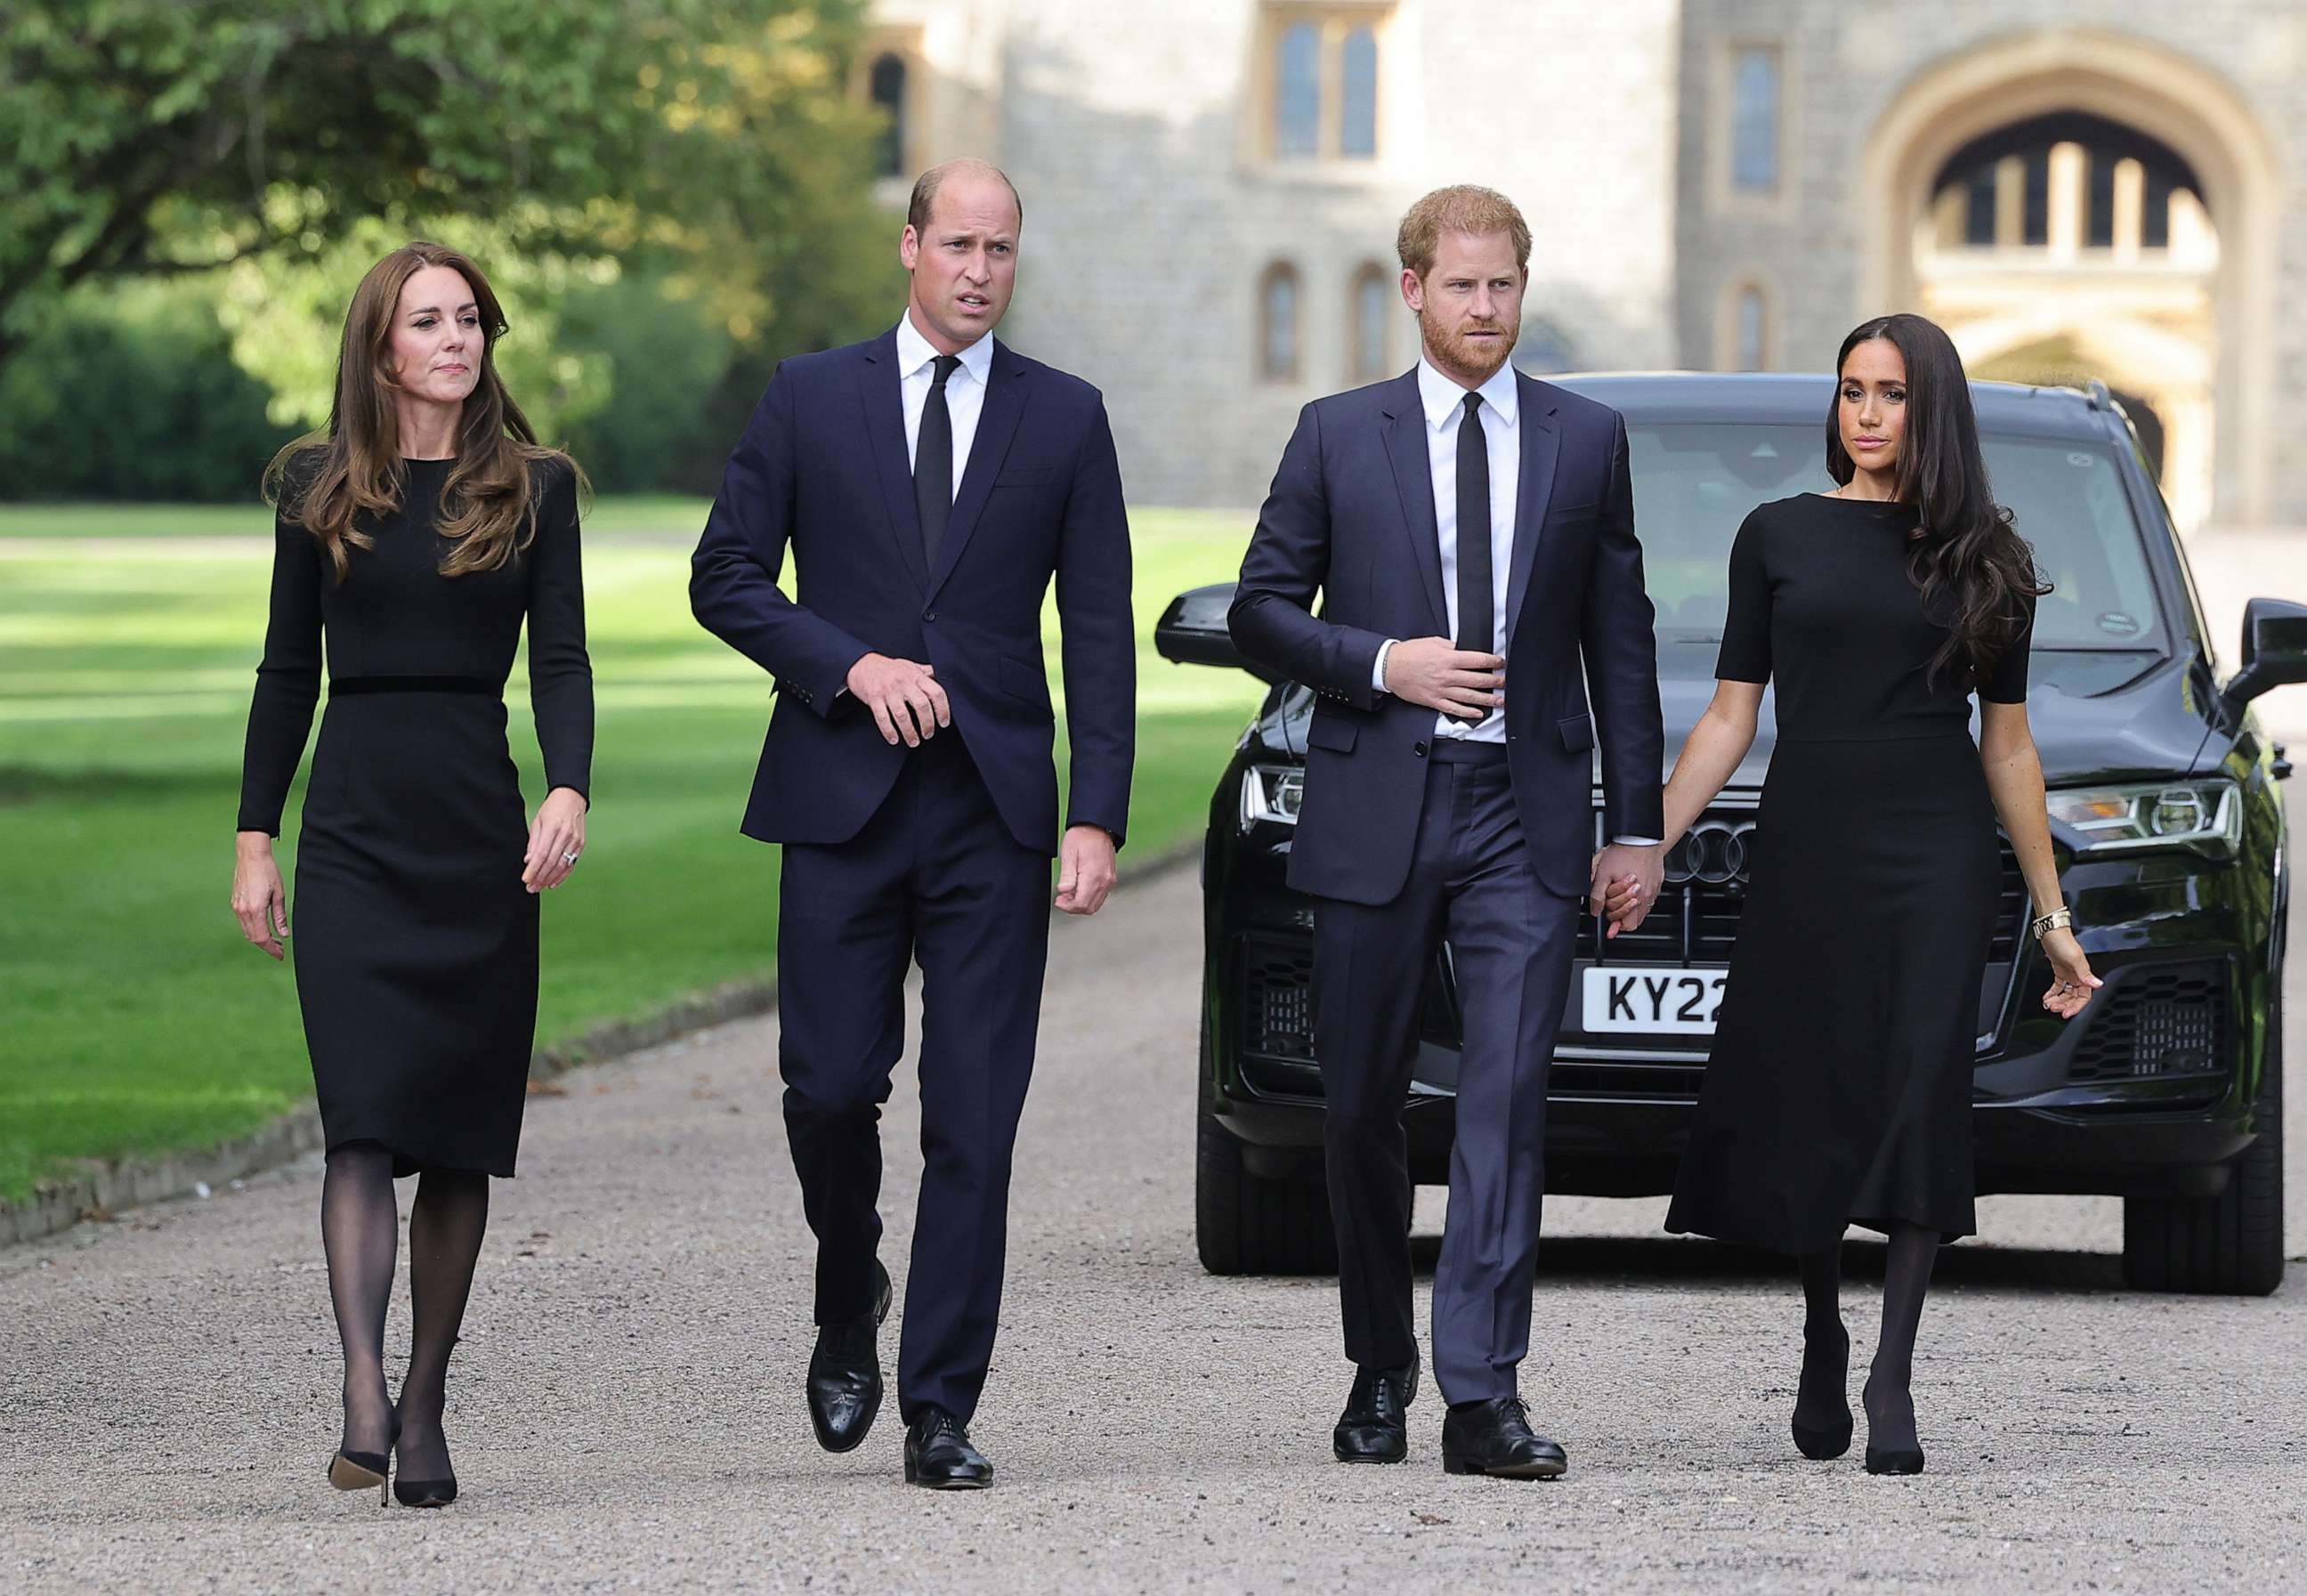 PHOTO: Catherine, Princess of Wales, Prince William, Prince of Wales, Prince Harry, Duke of Sussex, and Meghan, Duchess of Sussex on the long Walk at Windsor Castle arrive to view tributes to HM Queen Elizabeth on Sept. 10, 2022 in Windsor, England.